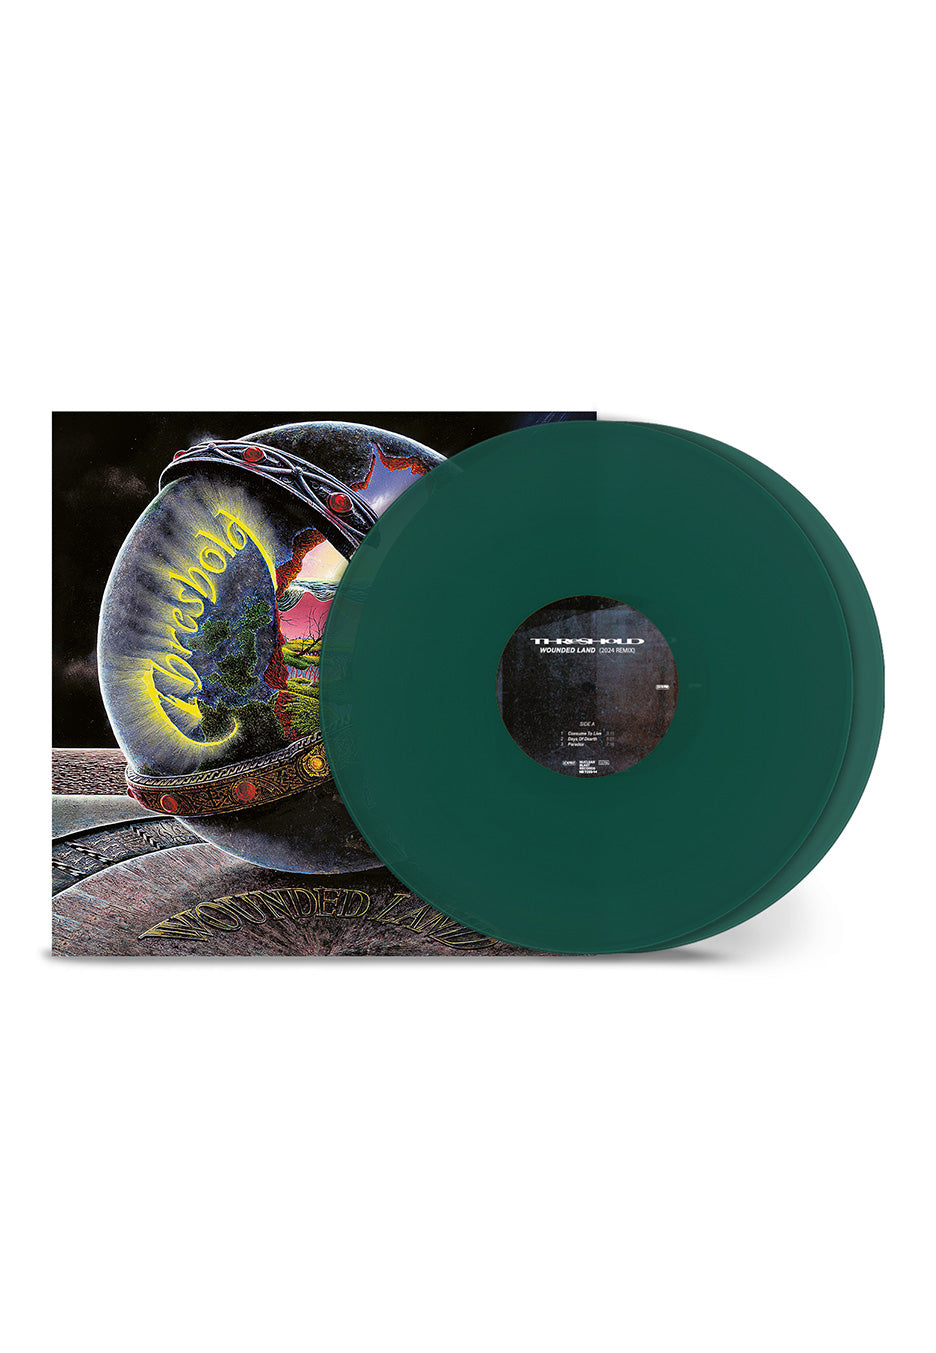 Threshold - Wounded Land (Remixed & Remastered) Ltd. Transparent Green - Colored 2 Vinyl